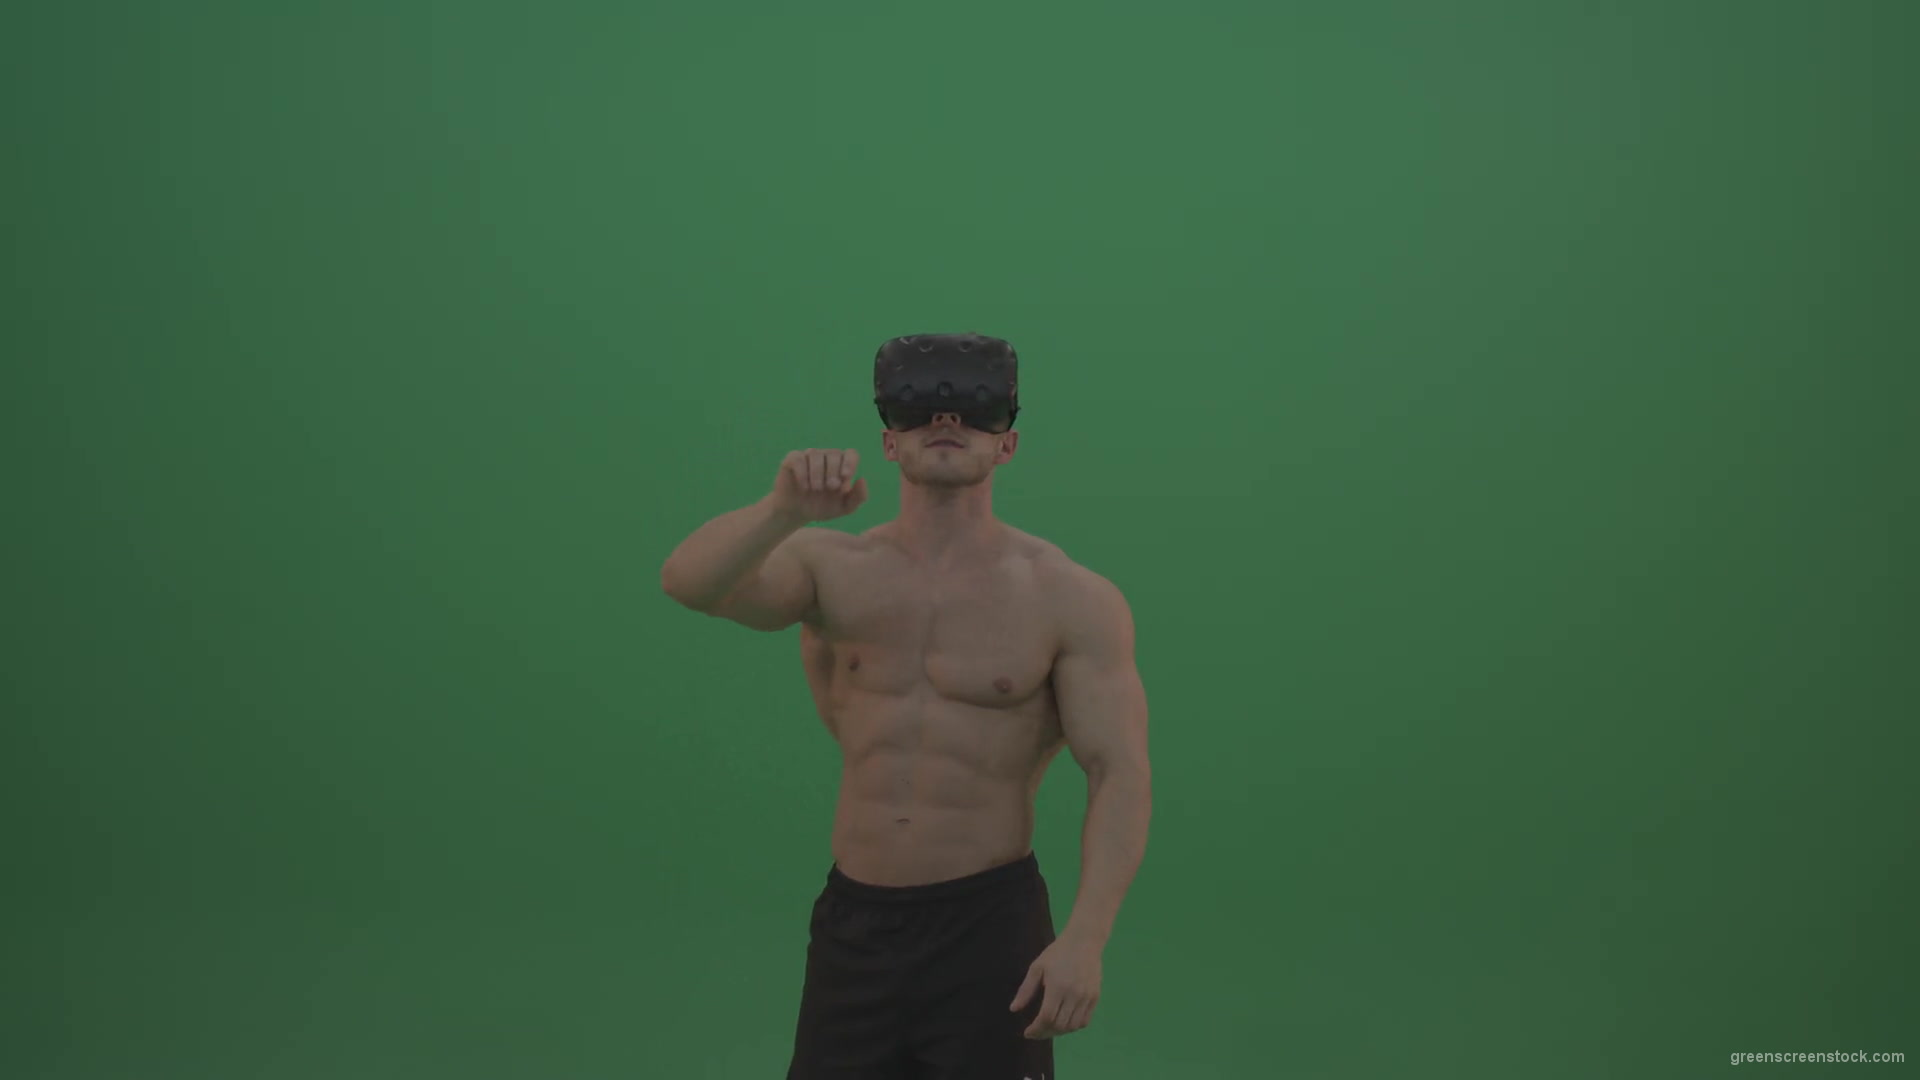 Young_Athletic_Bodybuilder_Working_On_Touch_Pad_Using_Virtual_Reality_Kit_On_Green_Screen_Wall_Background-1920_004 Green Screen Stock